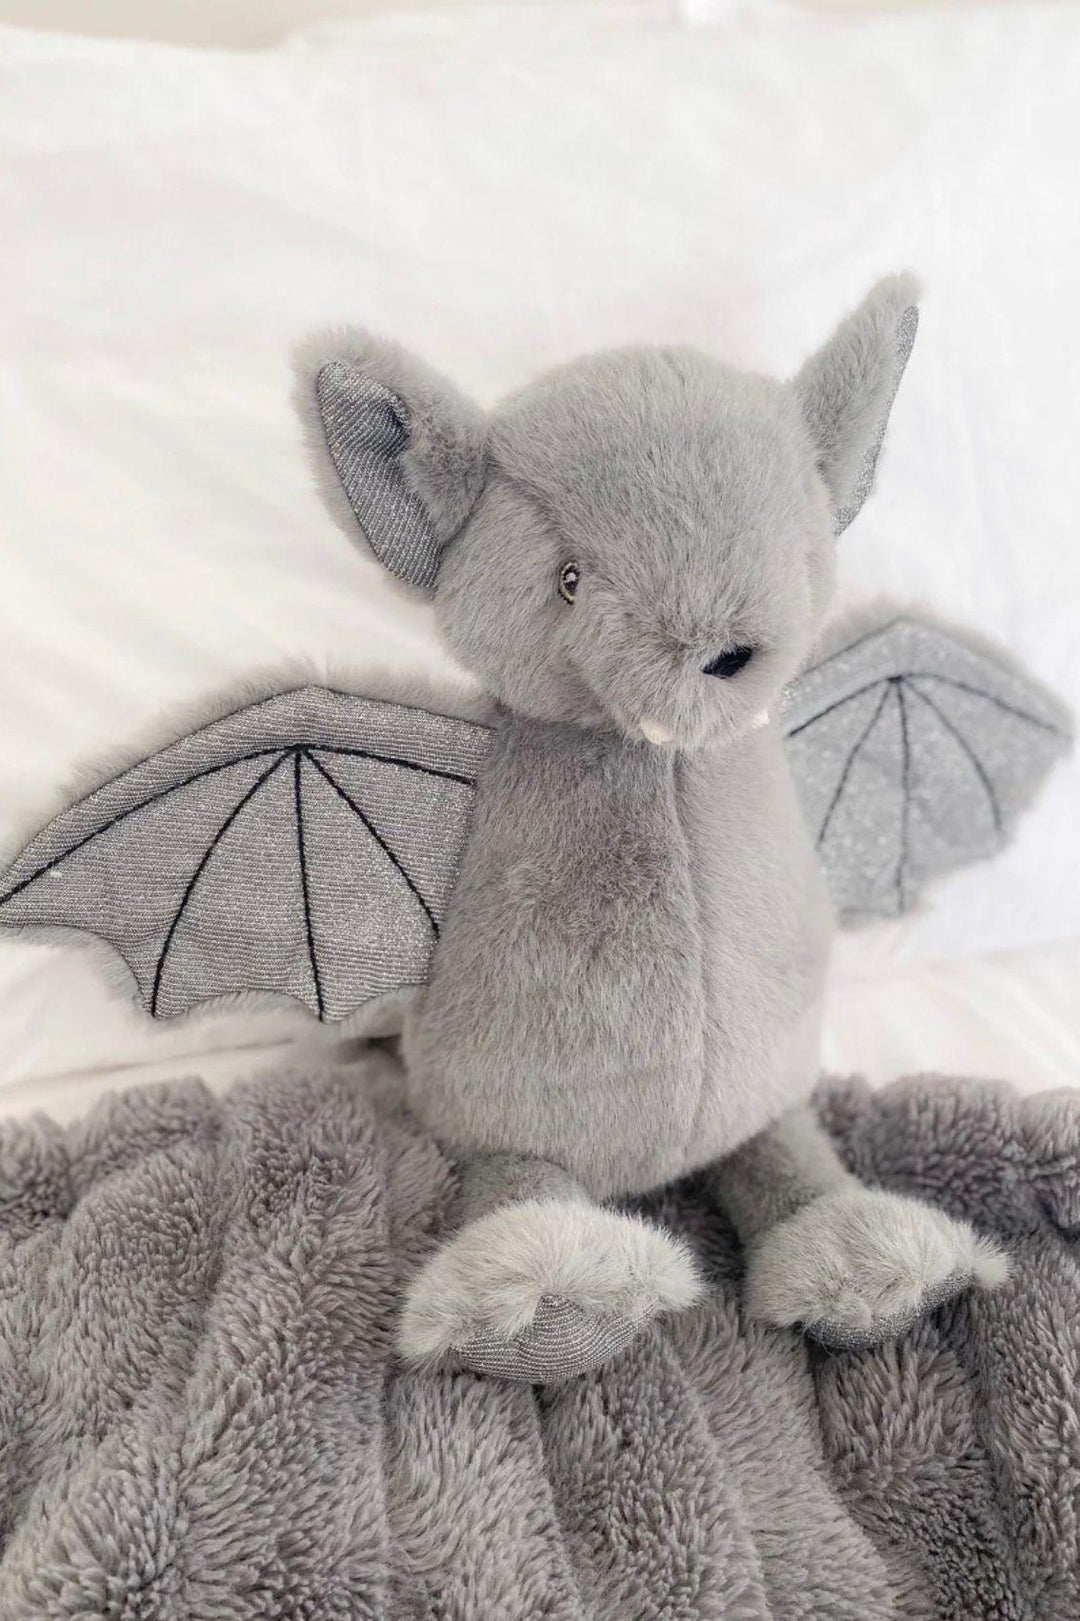 Bellamy the Bat Plush Doll - Enchanting 17-Inch Halloween Companion with Sparkly Wings